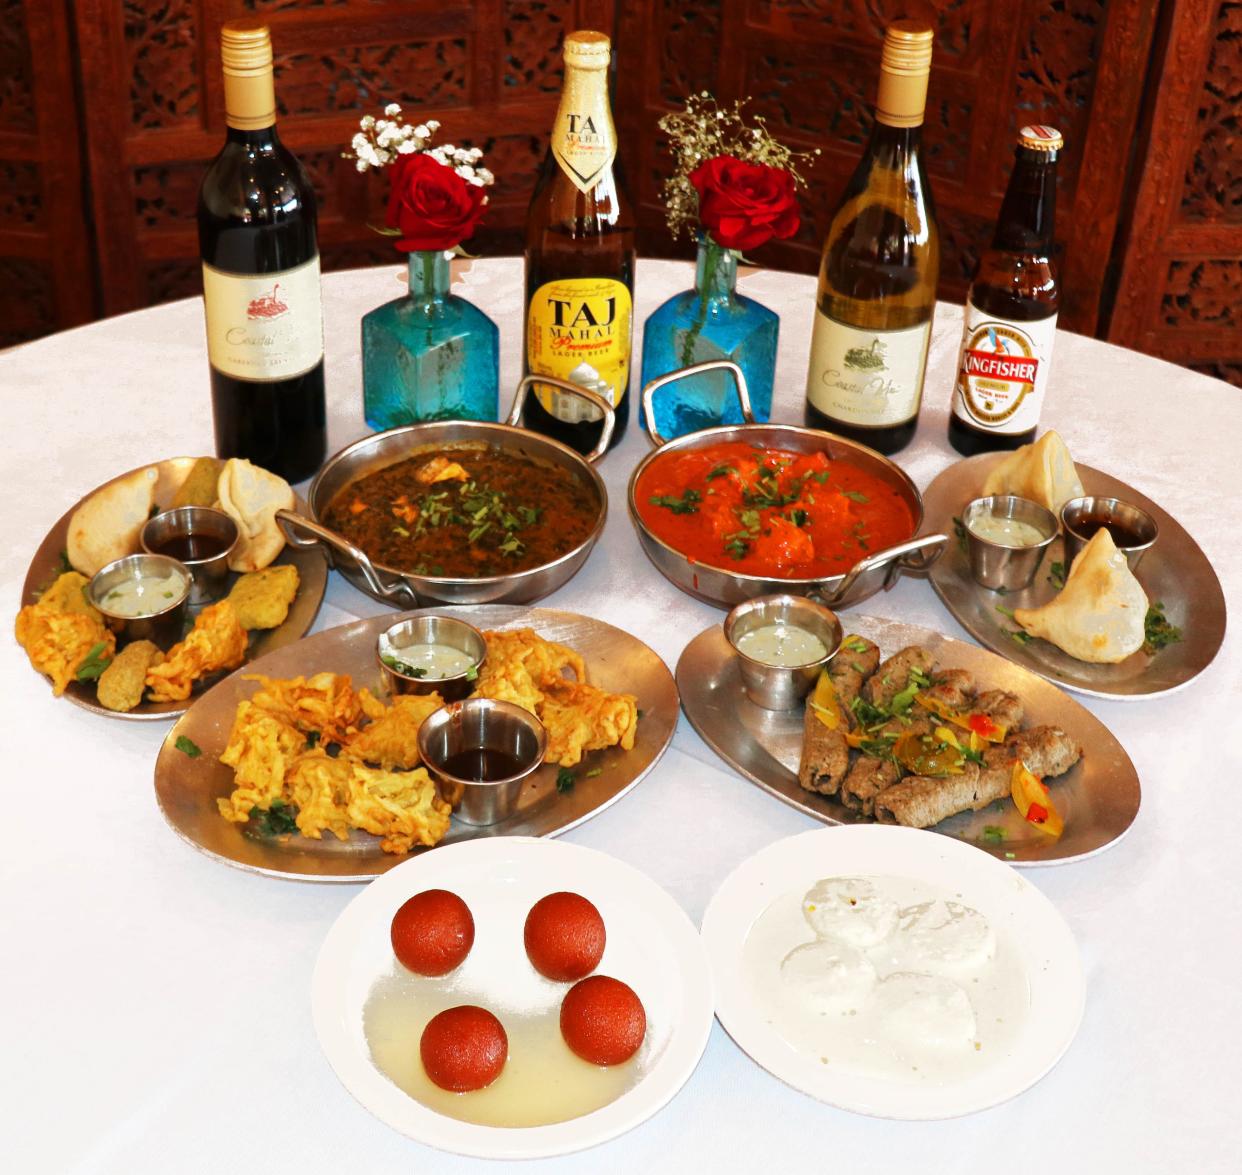 A variety of plant-based entrees, vegetables and dumplings with cream sauces, and meat-based dishes can be enjoyed at Guru's Indian Restaurant in Clermont.